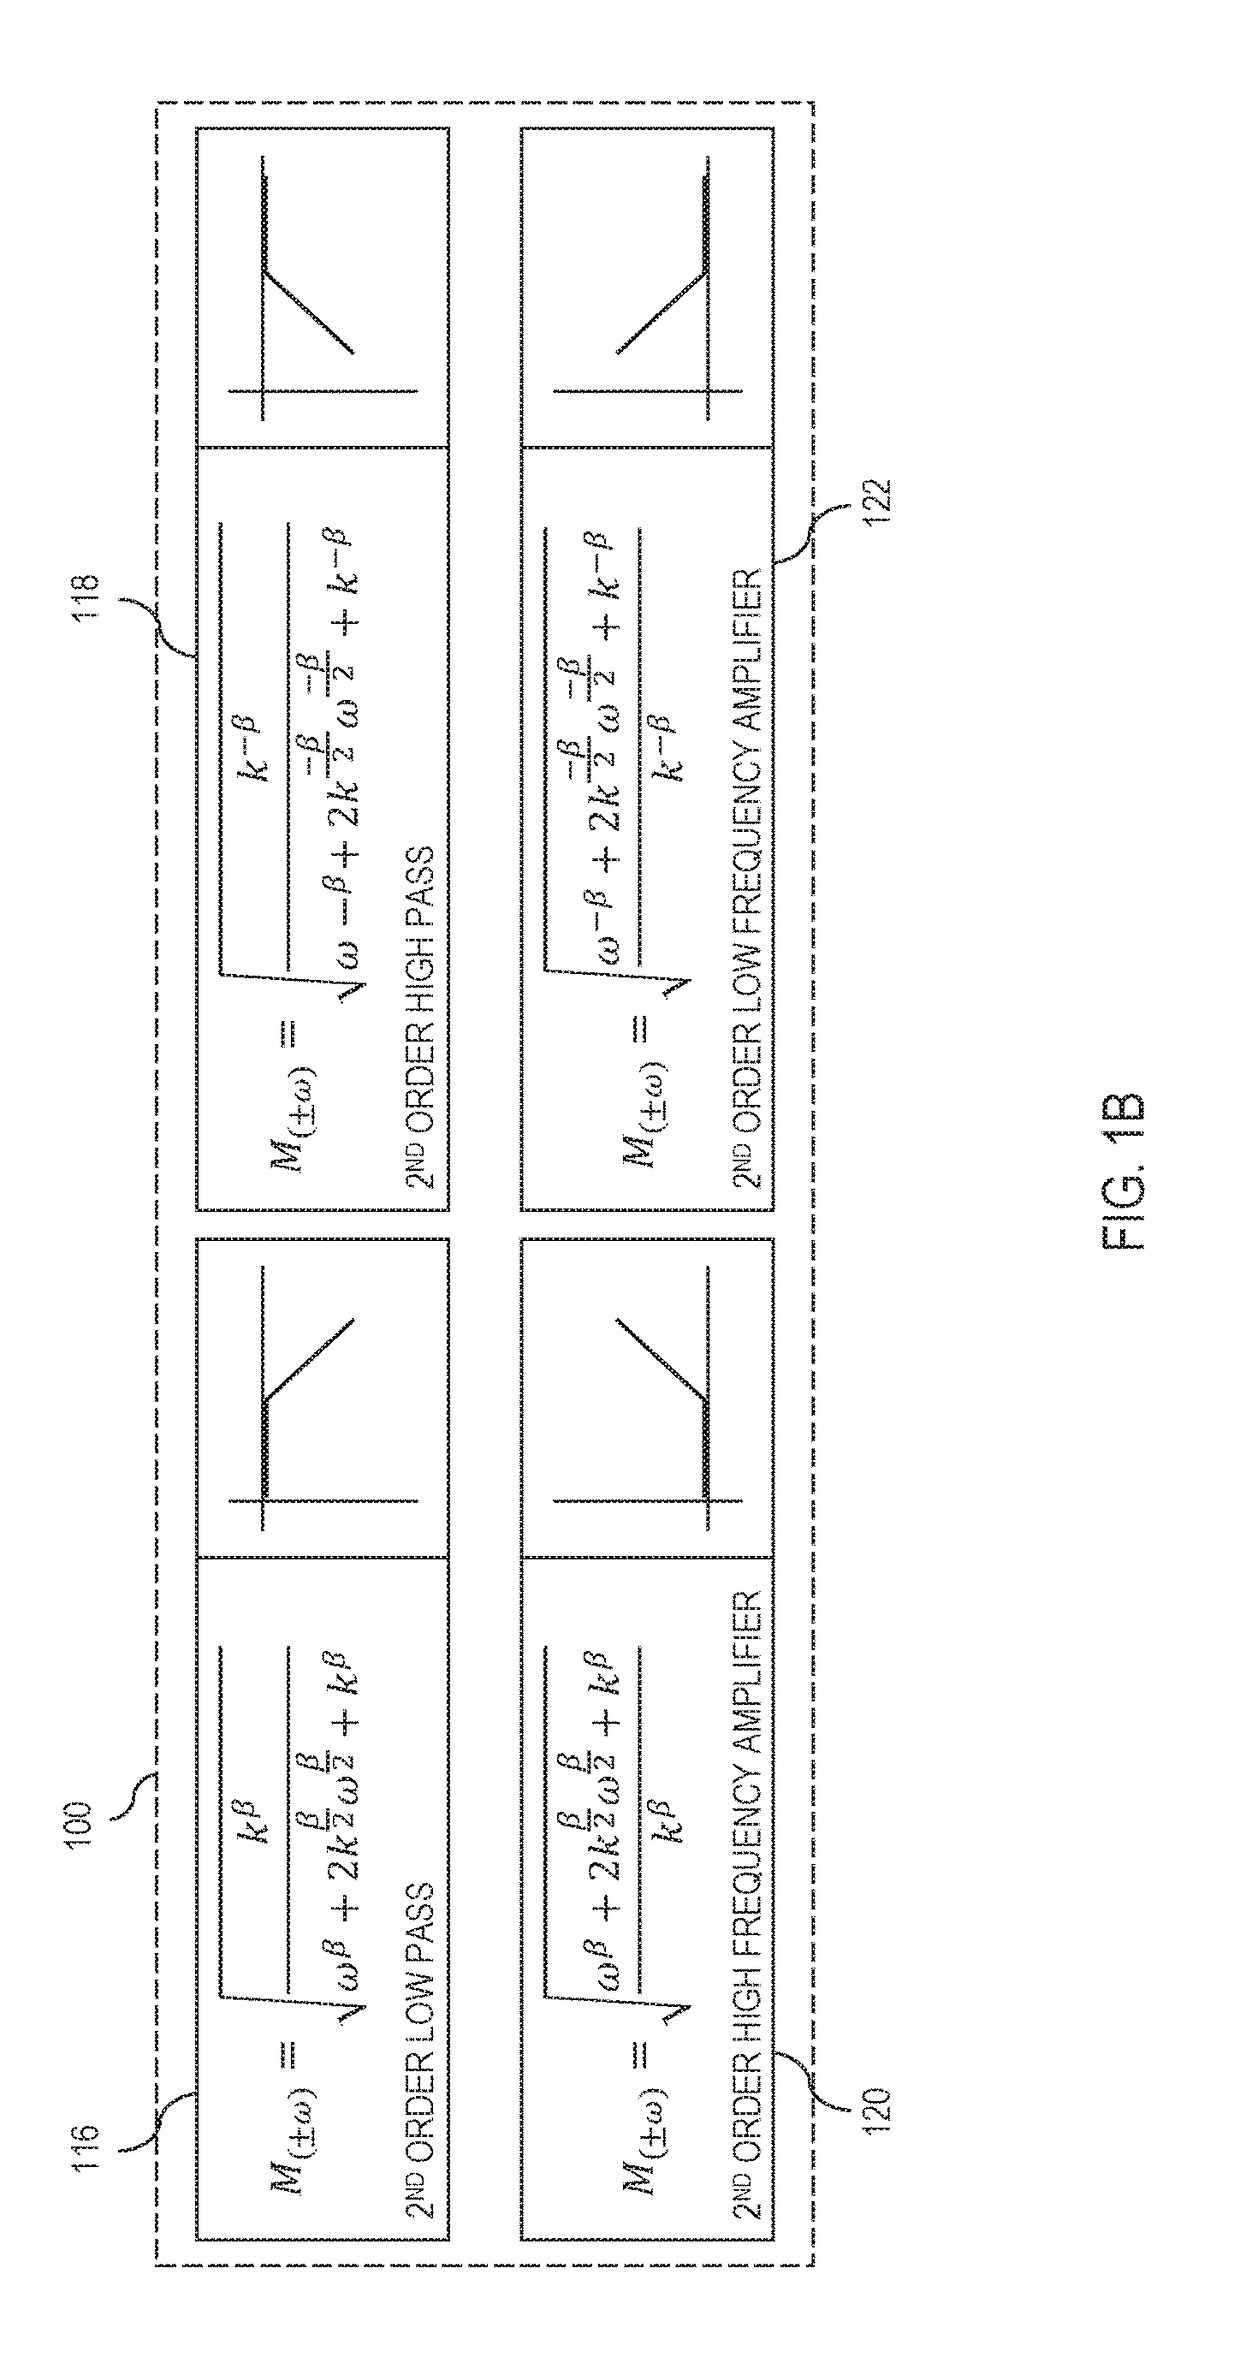 Fractional scaling digital signal processing